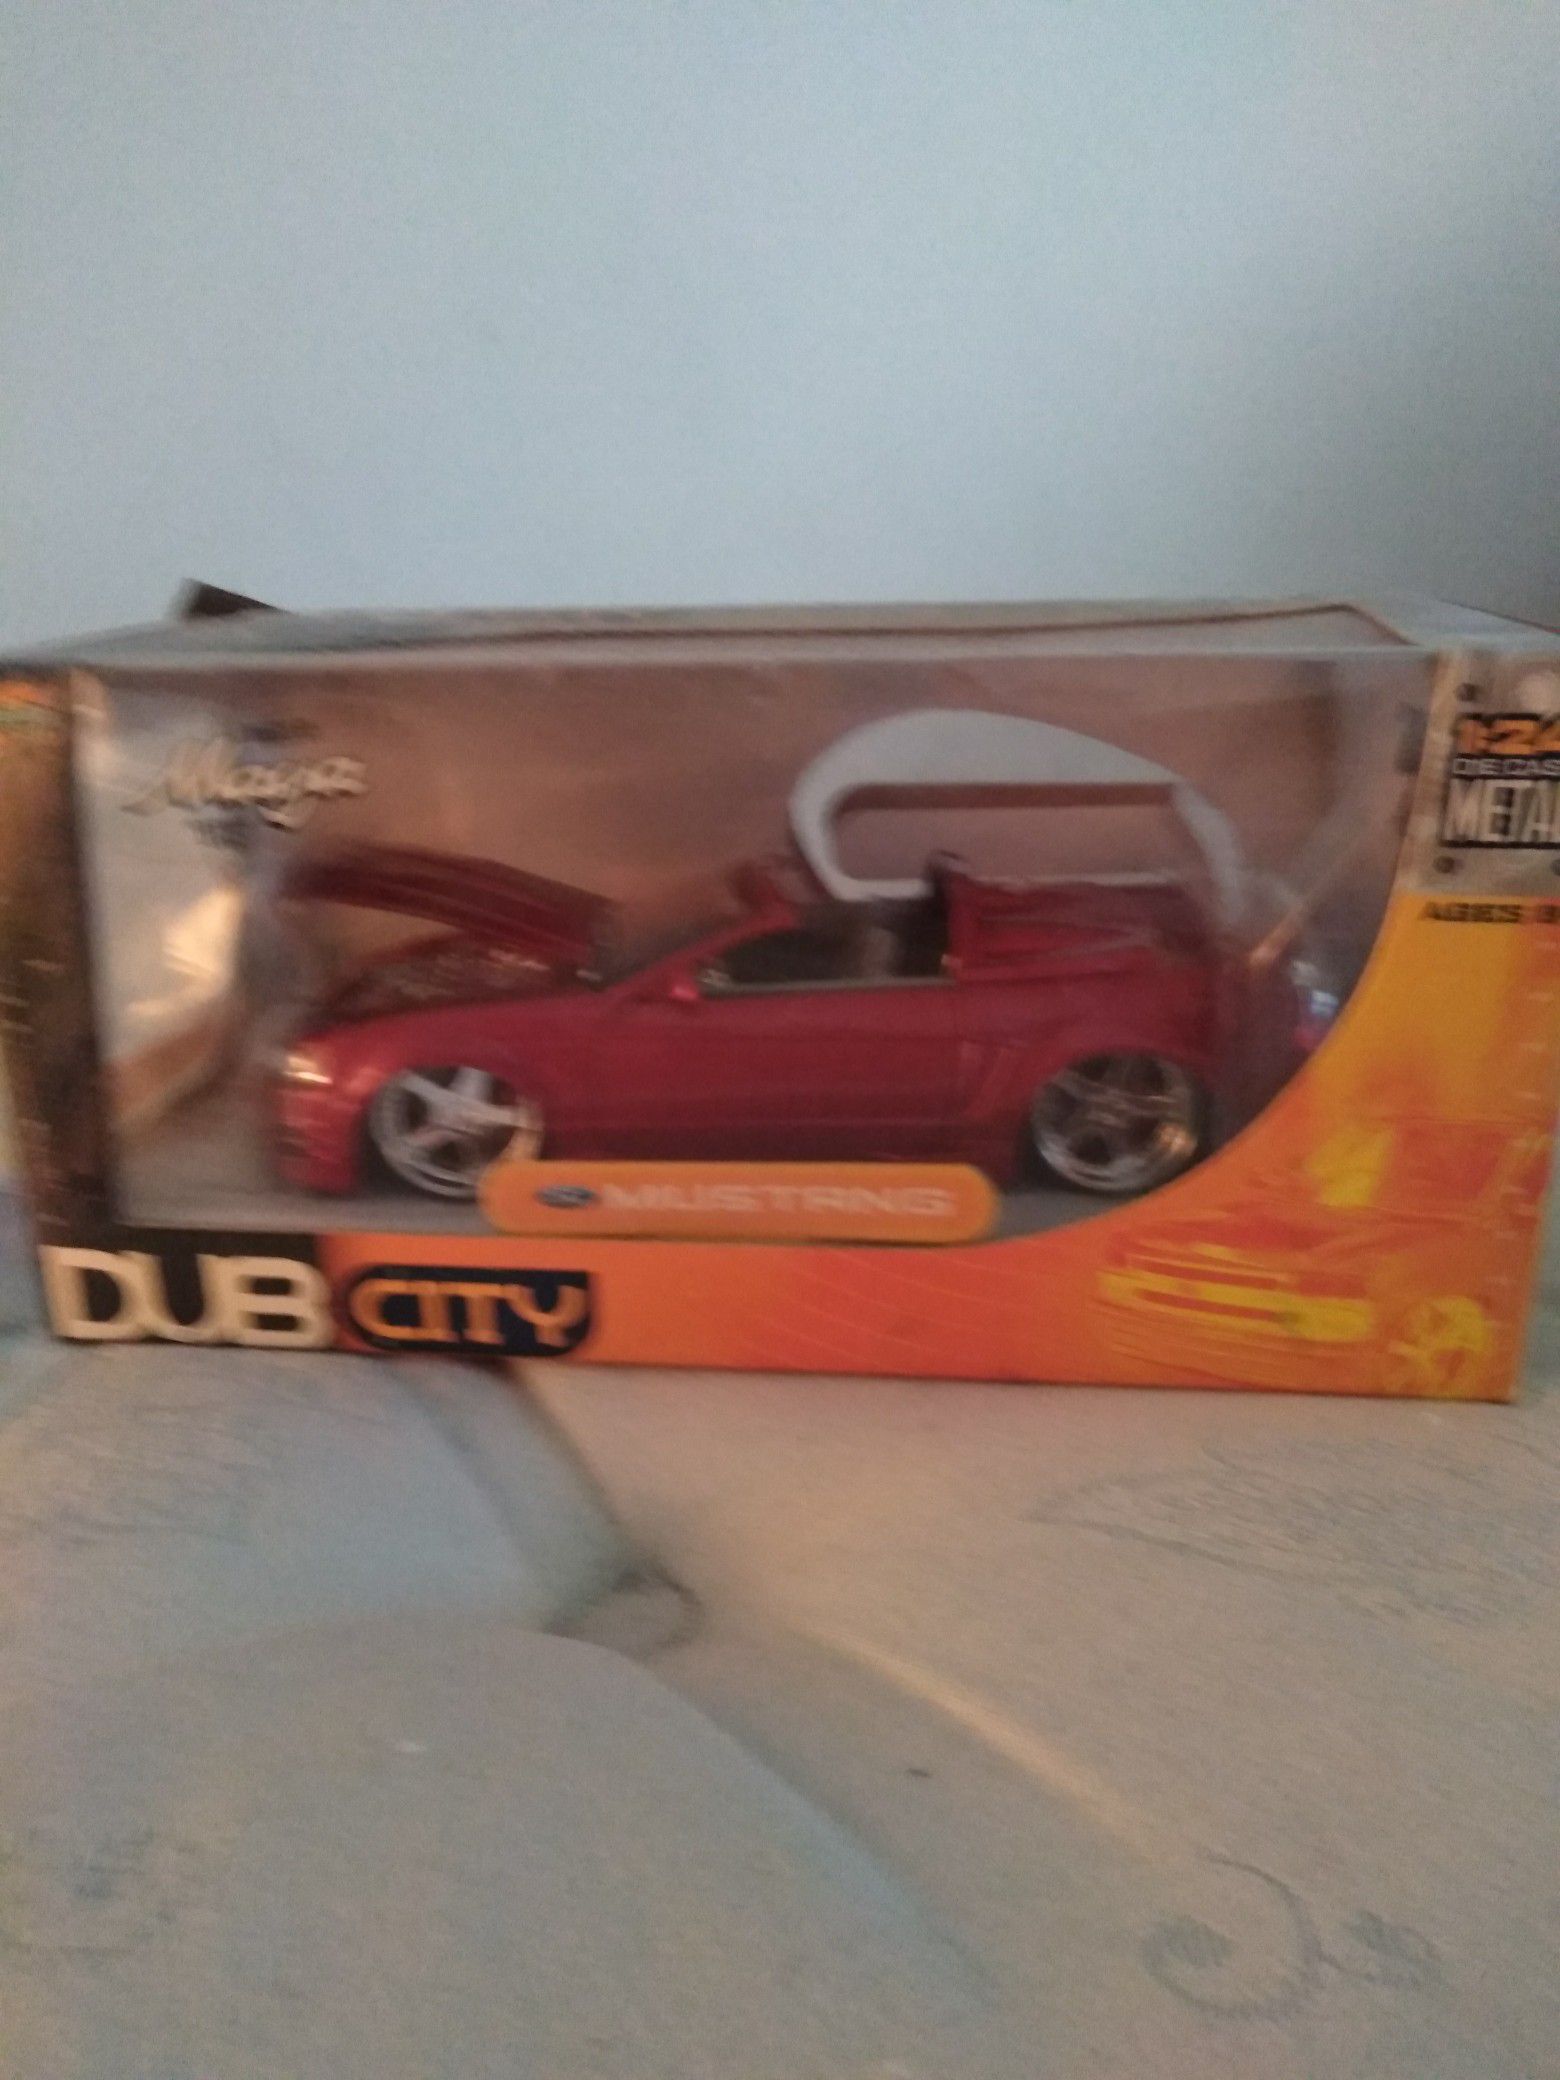 Dub City 1:24 scale Mustang